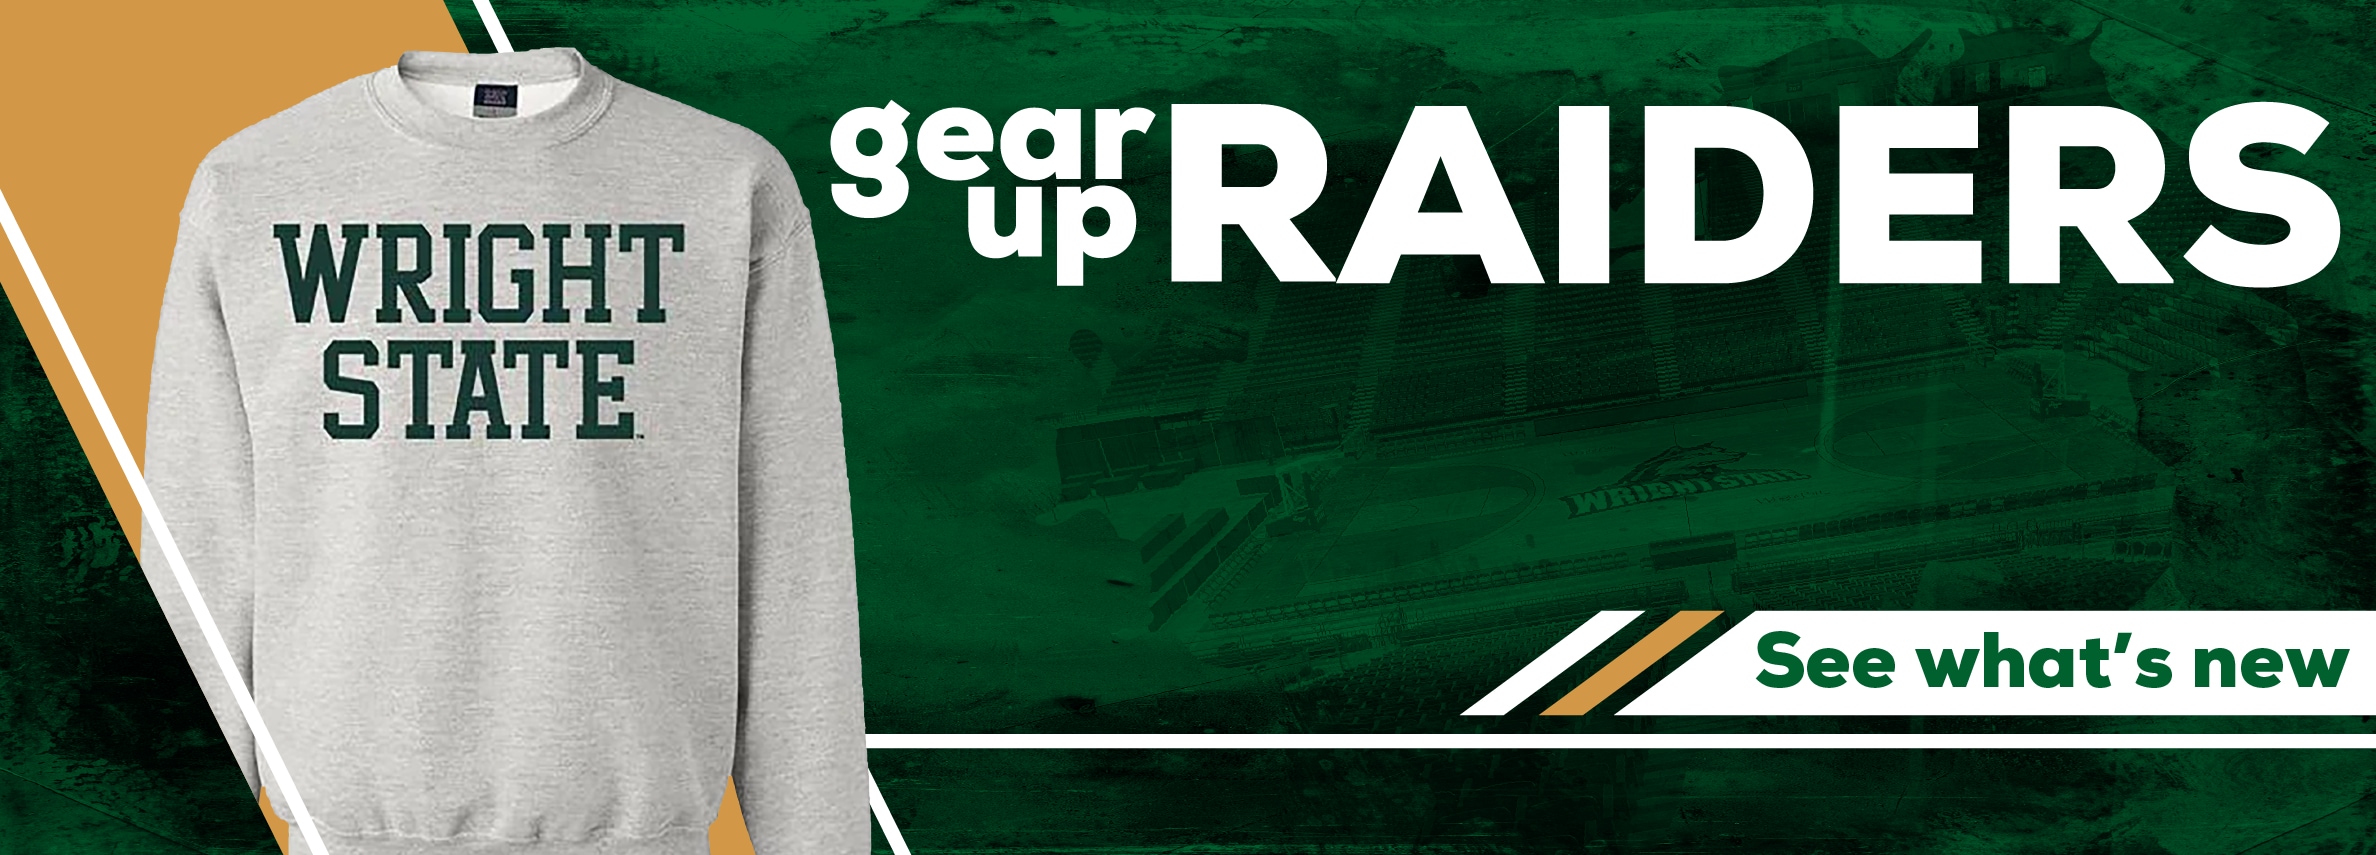 Gear Up Raiders. See what's new.